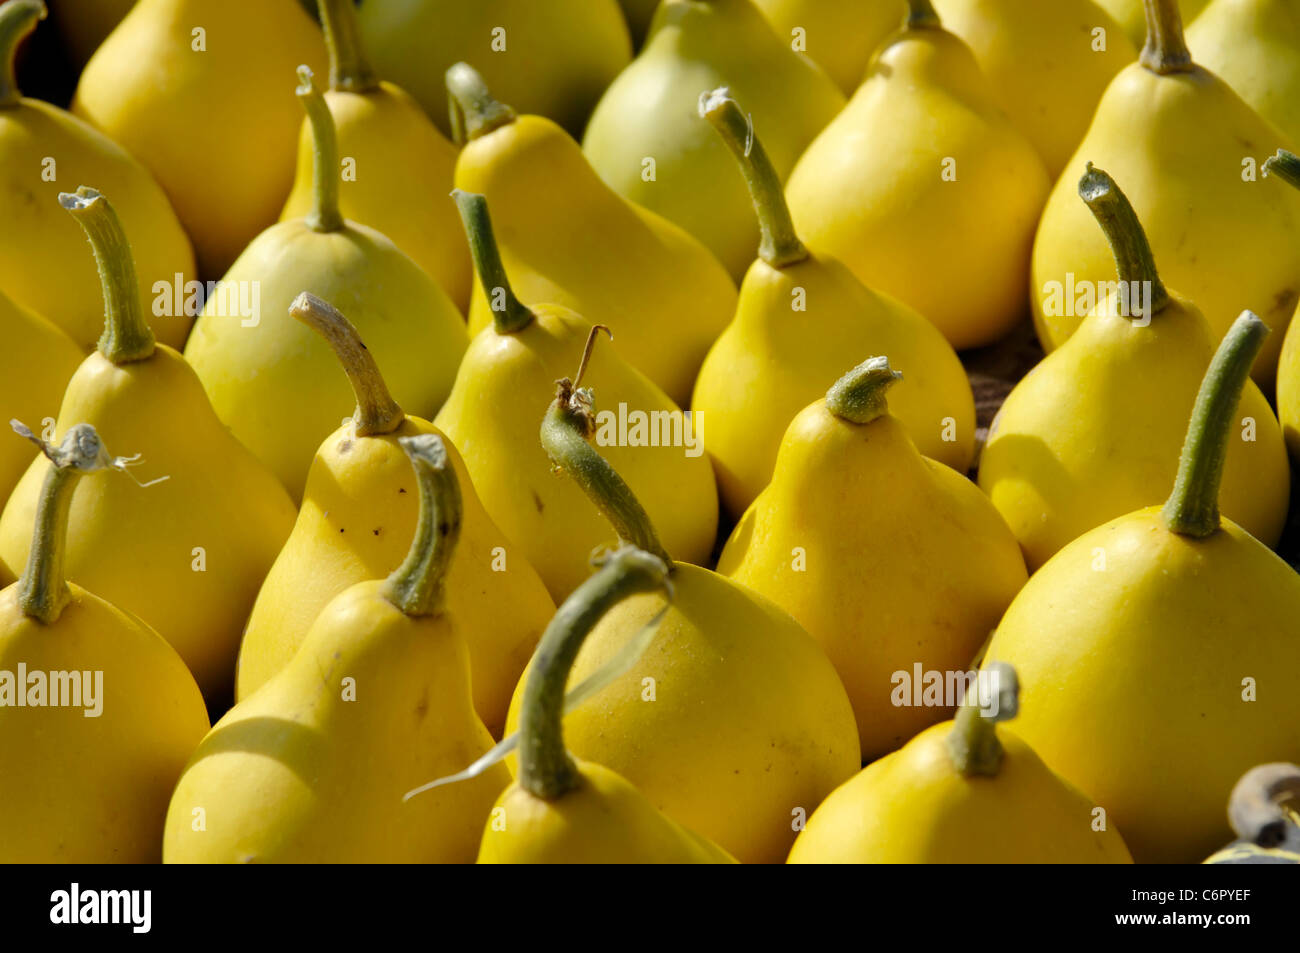 Small yellow pear-shaped gourds close-up background Stock Photo